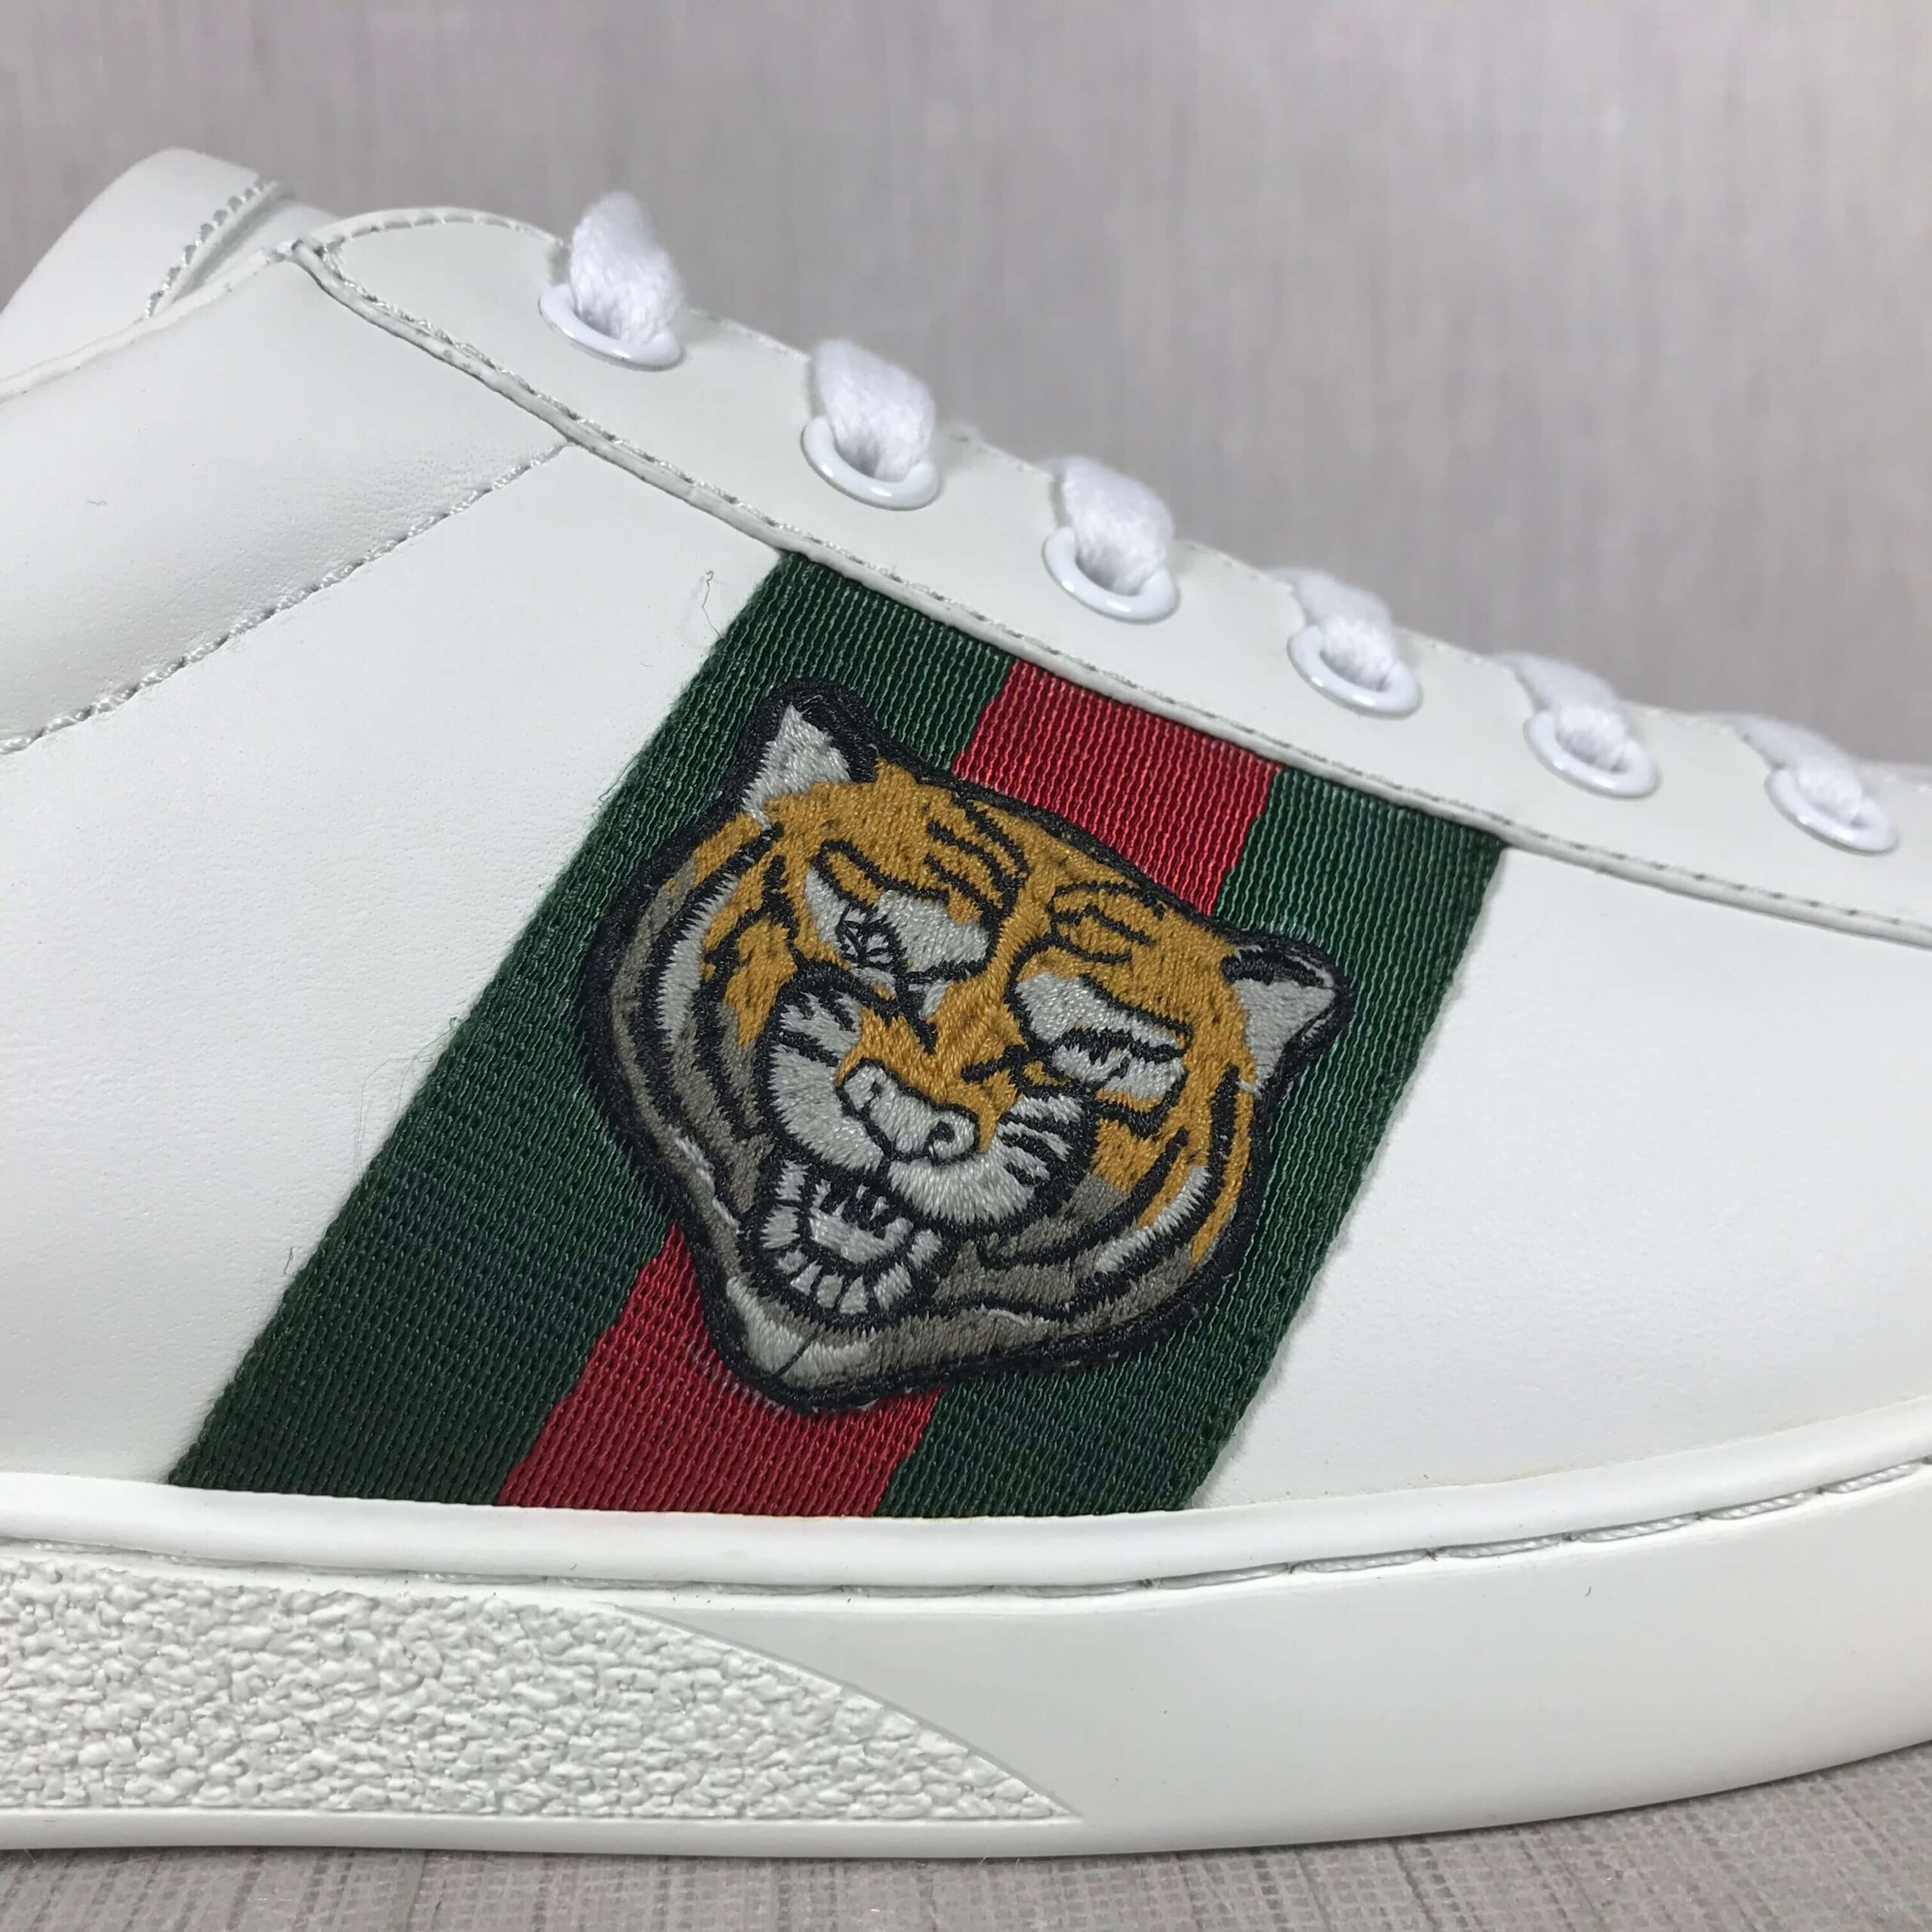 Giày Gucci Ace Tiger Họa Tiết Mặt Hổ Like Auth